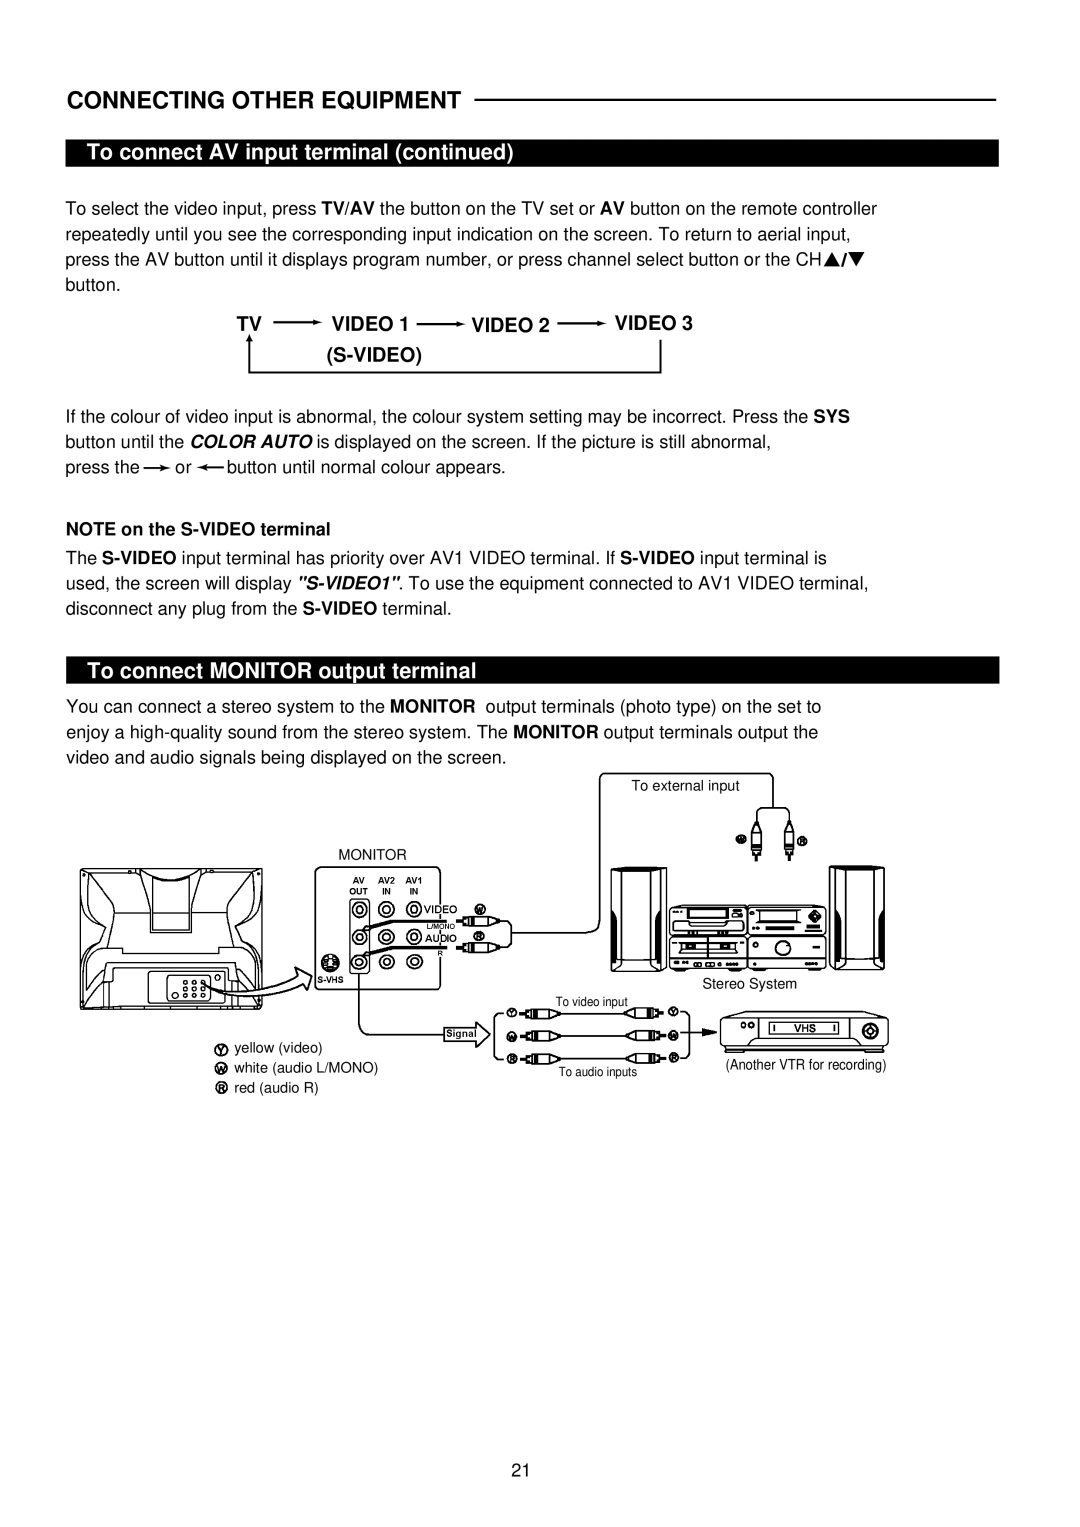 Palsonic 6826G owner manual To connect Monitor output terminal, TV Video 1 Video 2 Video 3 S-VIDEO 